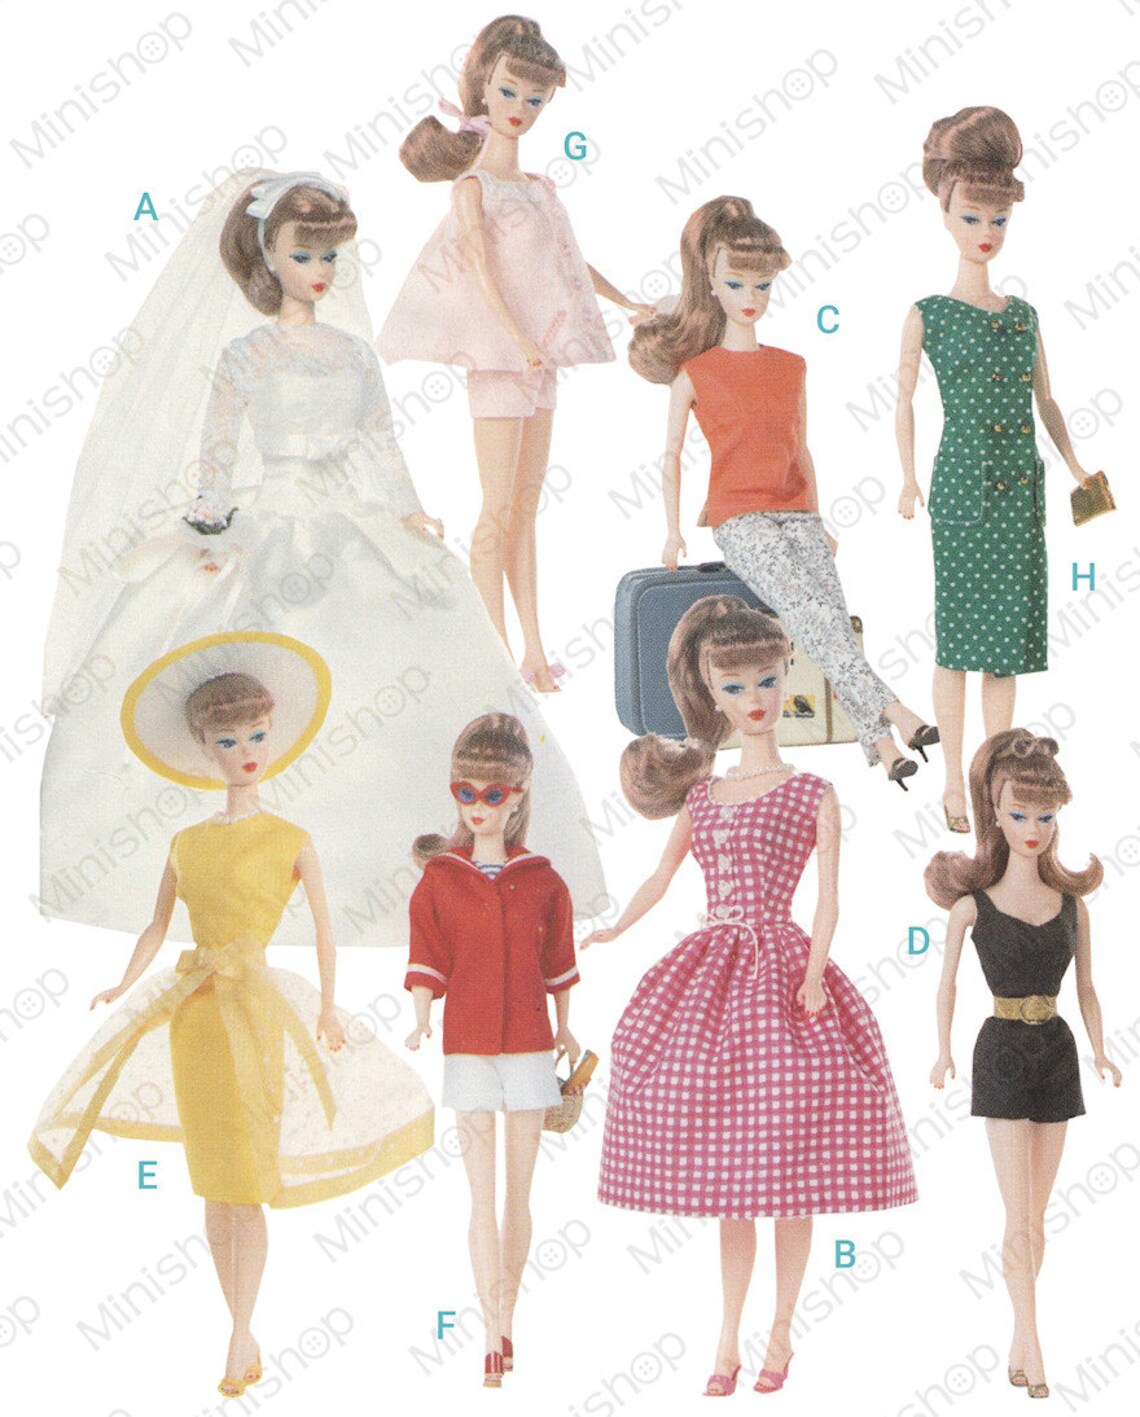 Barbie Doll Sewing Pattern: 9834 | Etsy